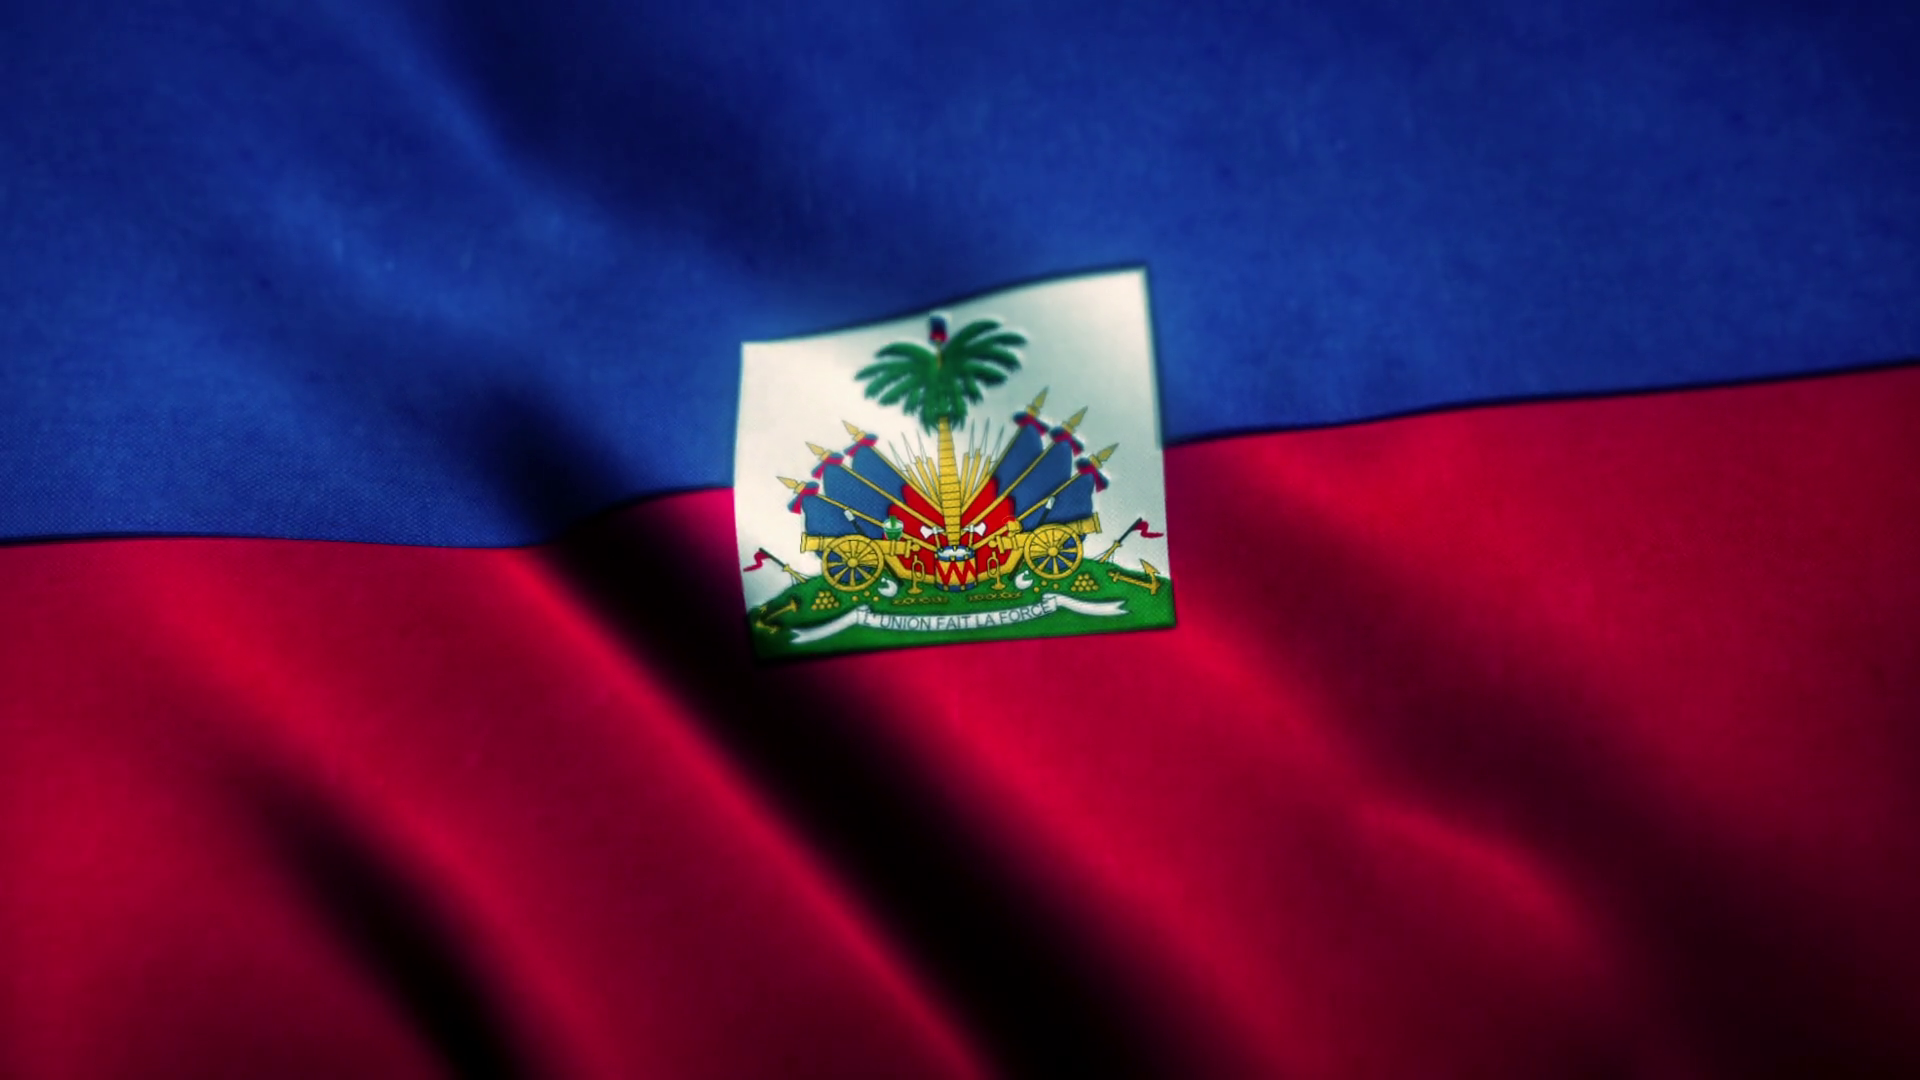 Haiti Flag Png 92 Images In Collection Page - Stitch , HD Wallpaper & Backgrounds